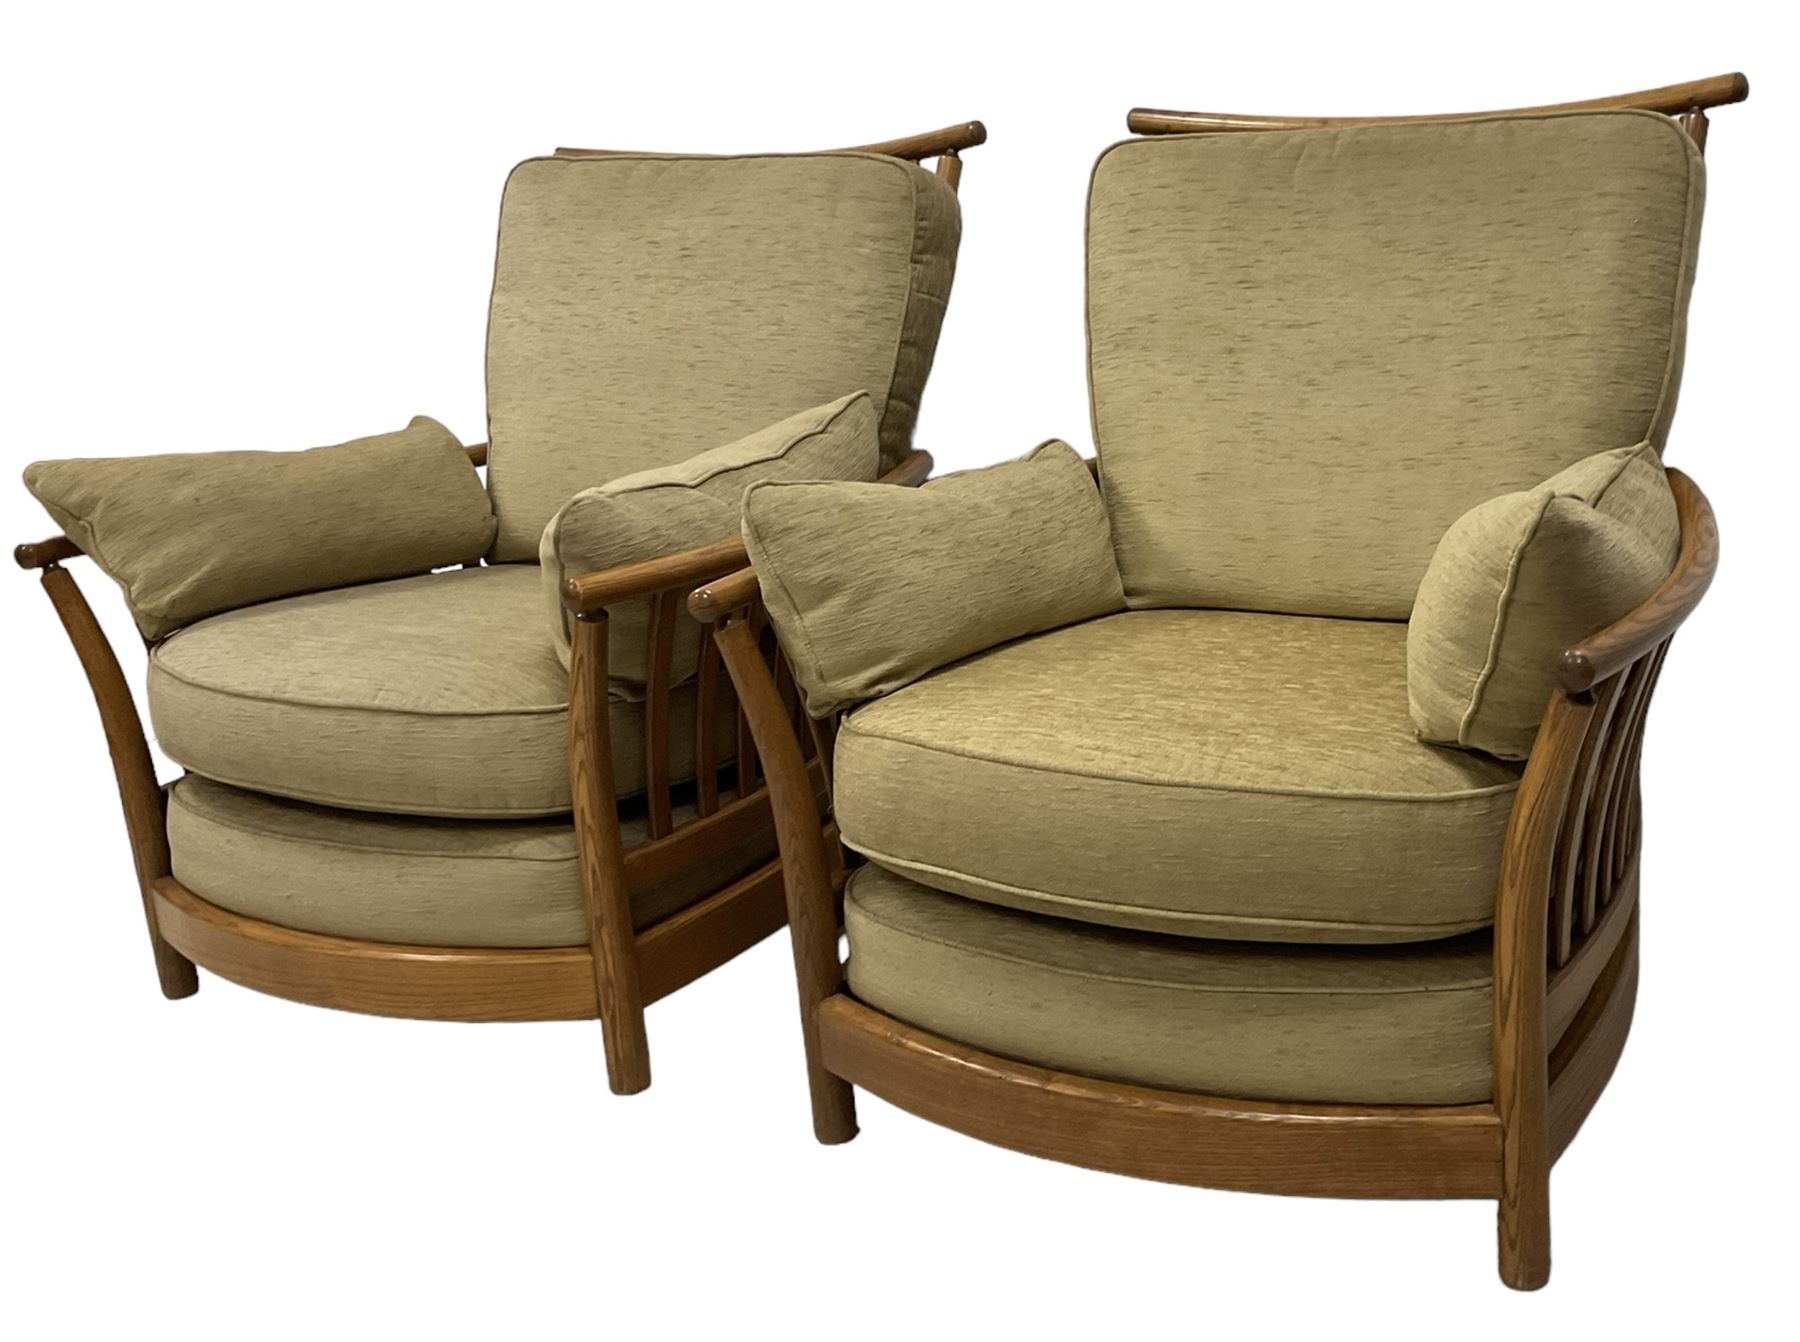 Ercol - pair of mid-20th century elm and beech 'Renaissance' armchairs - Image 3 of 11